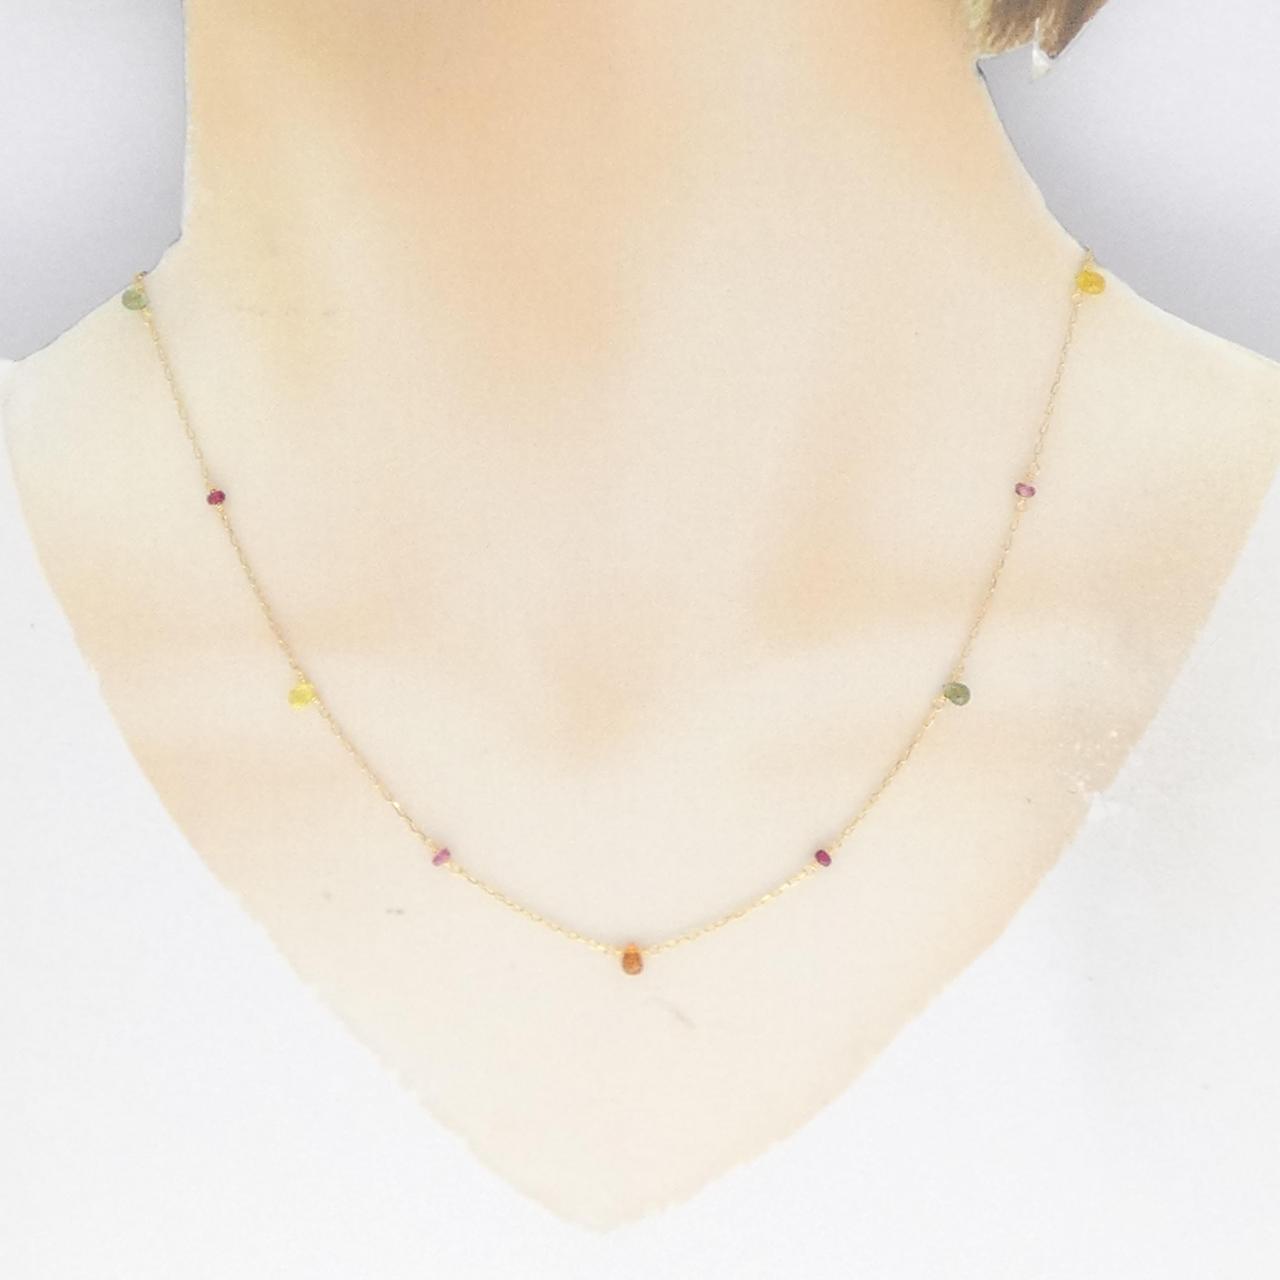 K18YG colored stone necklace